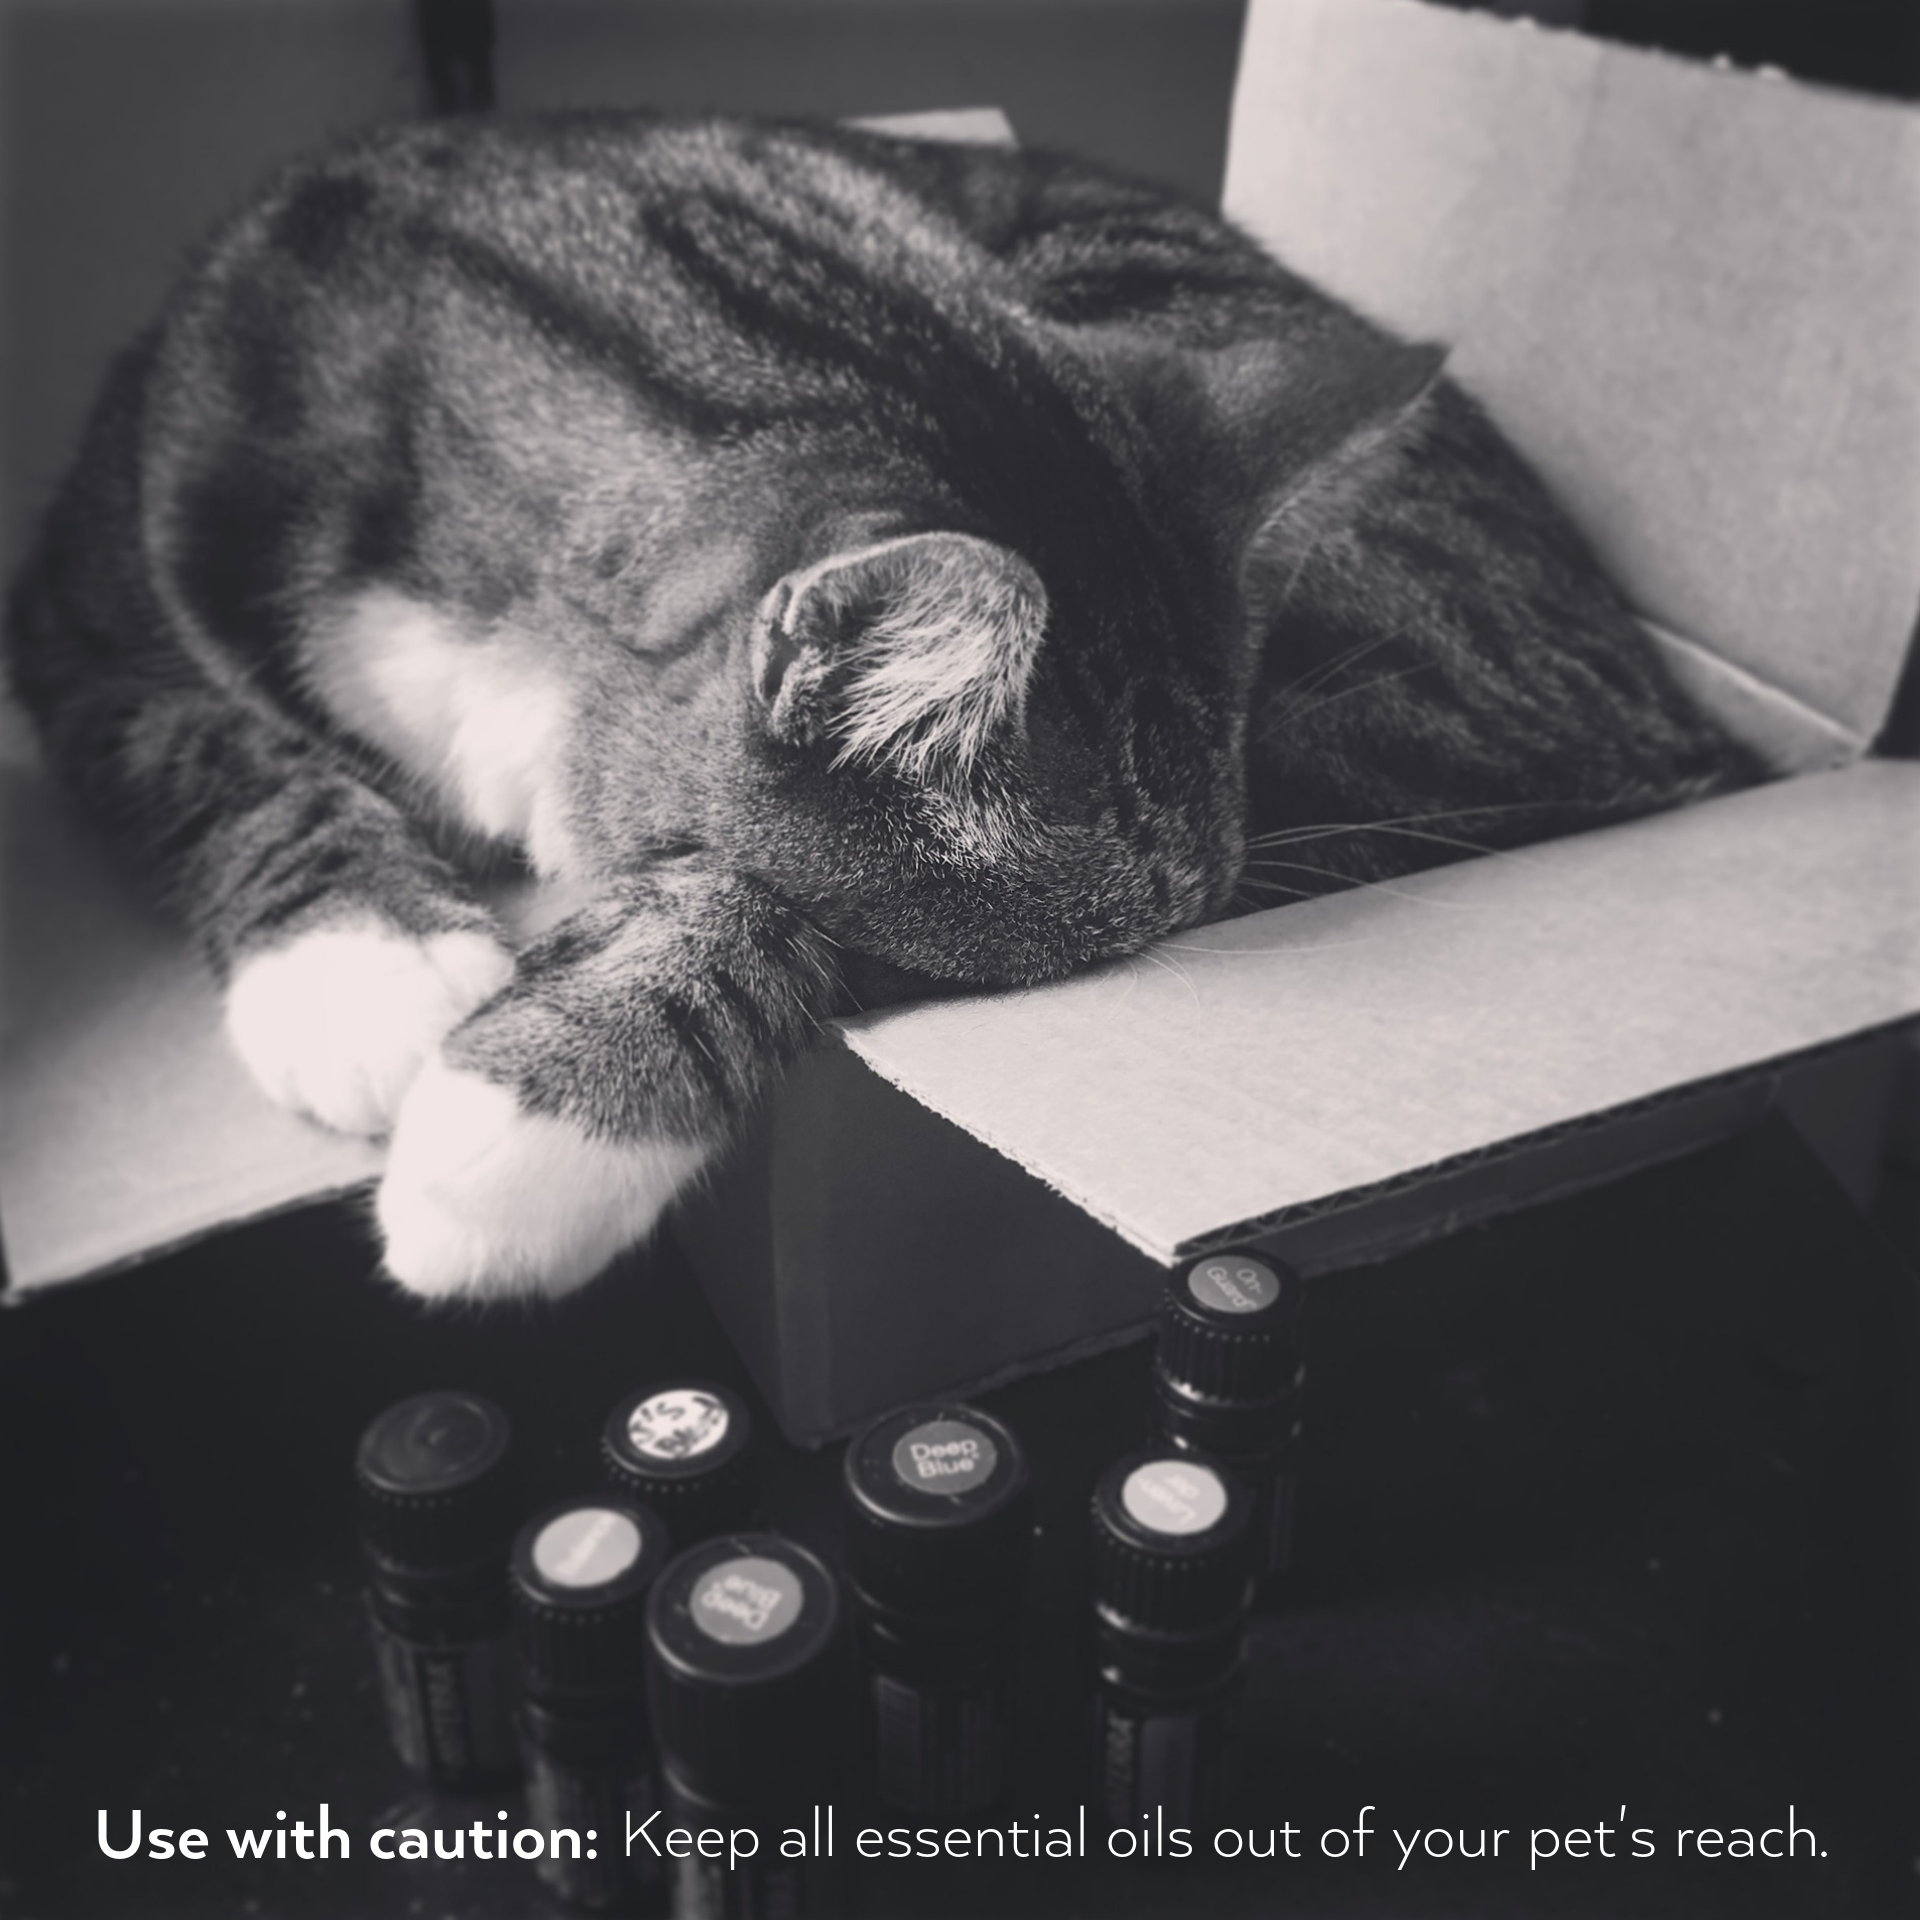 Keep all essential oils out of your pet's reach.